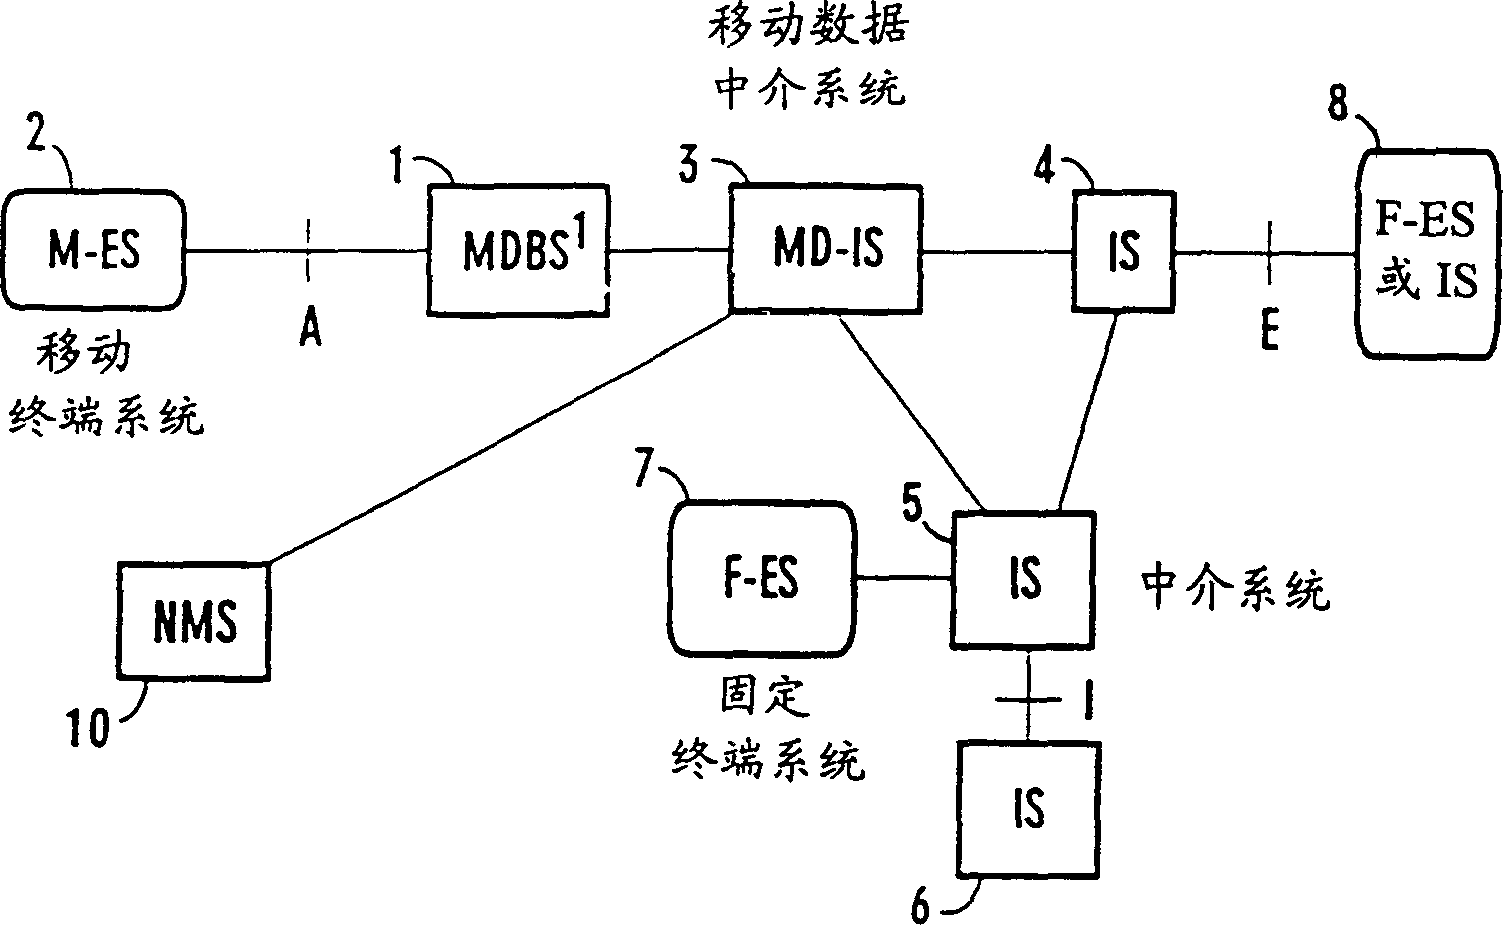 Method and apparatus for reduced power consumption in mobile packet data communication system